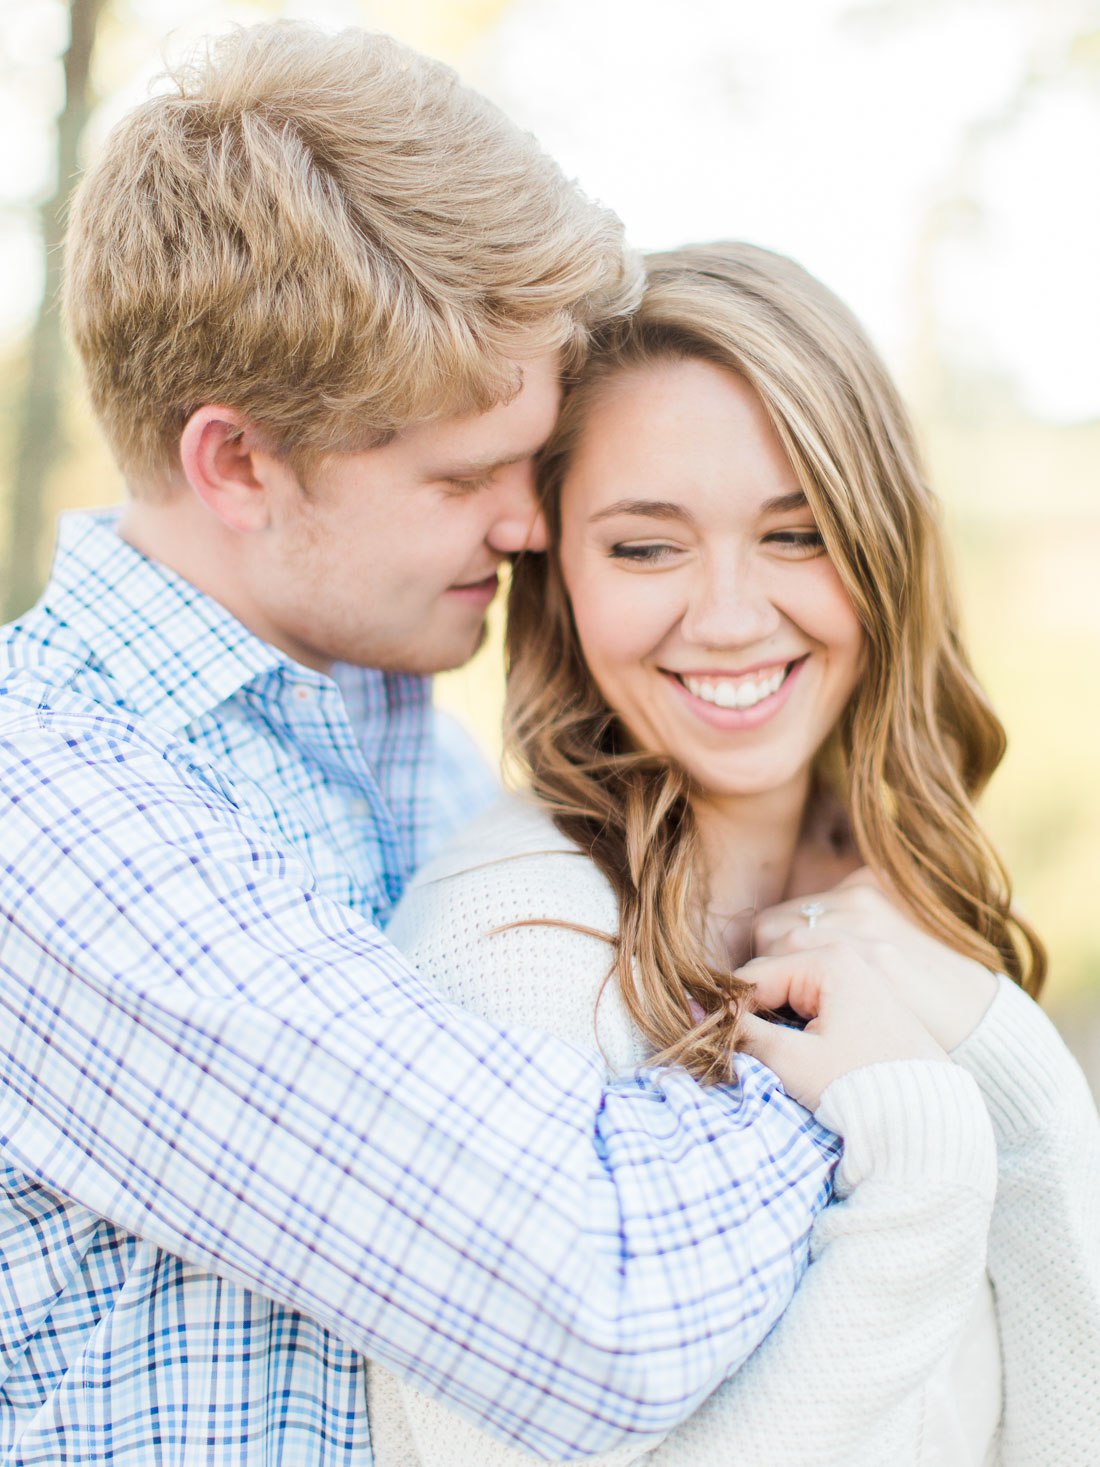 Tori and Christian Engagement Photos - Fort Worth Wedding Photographer - Fort Worth Engagement Photographer - College Station - Bryan - Houston - Dallas - Fort Worth - Wedding Photographer - Texas Wedding Photographer - Research Park - Aggie Engagement Session